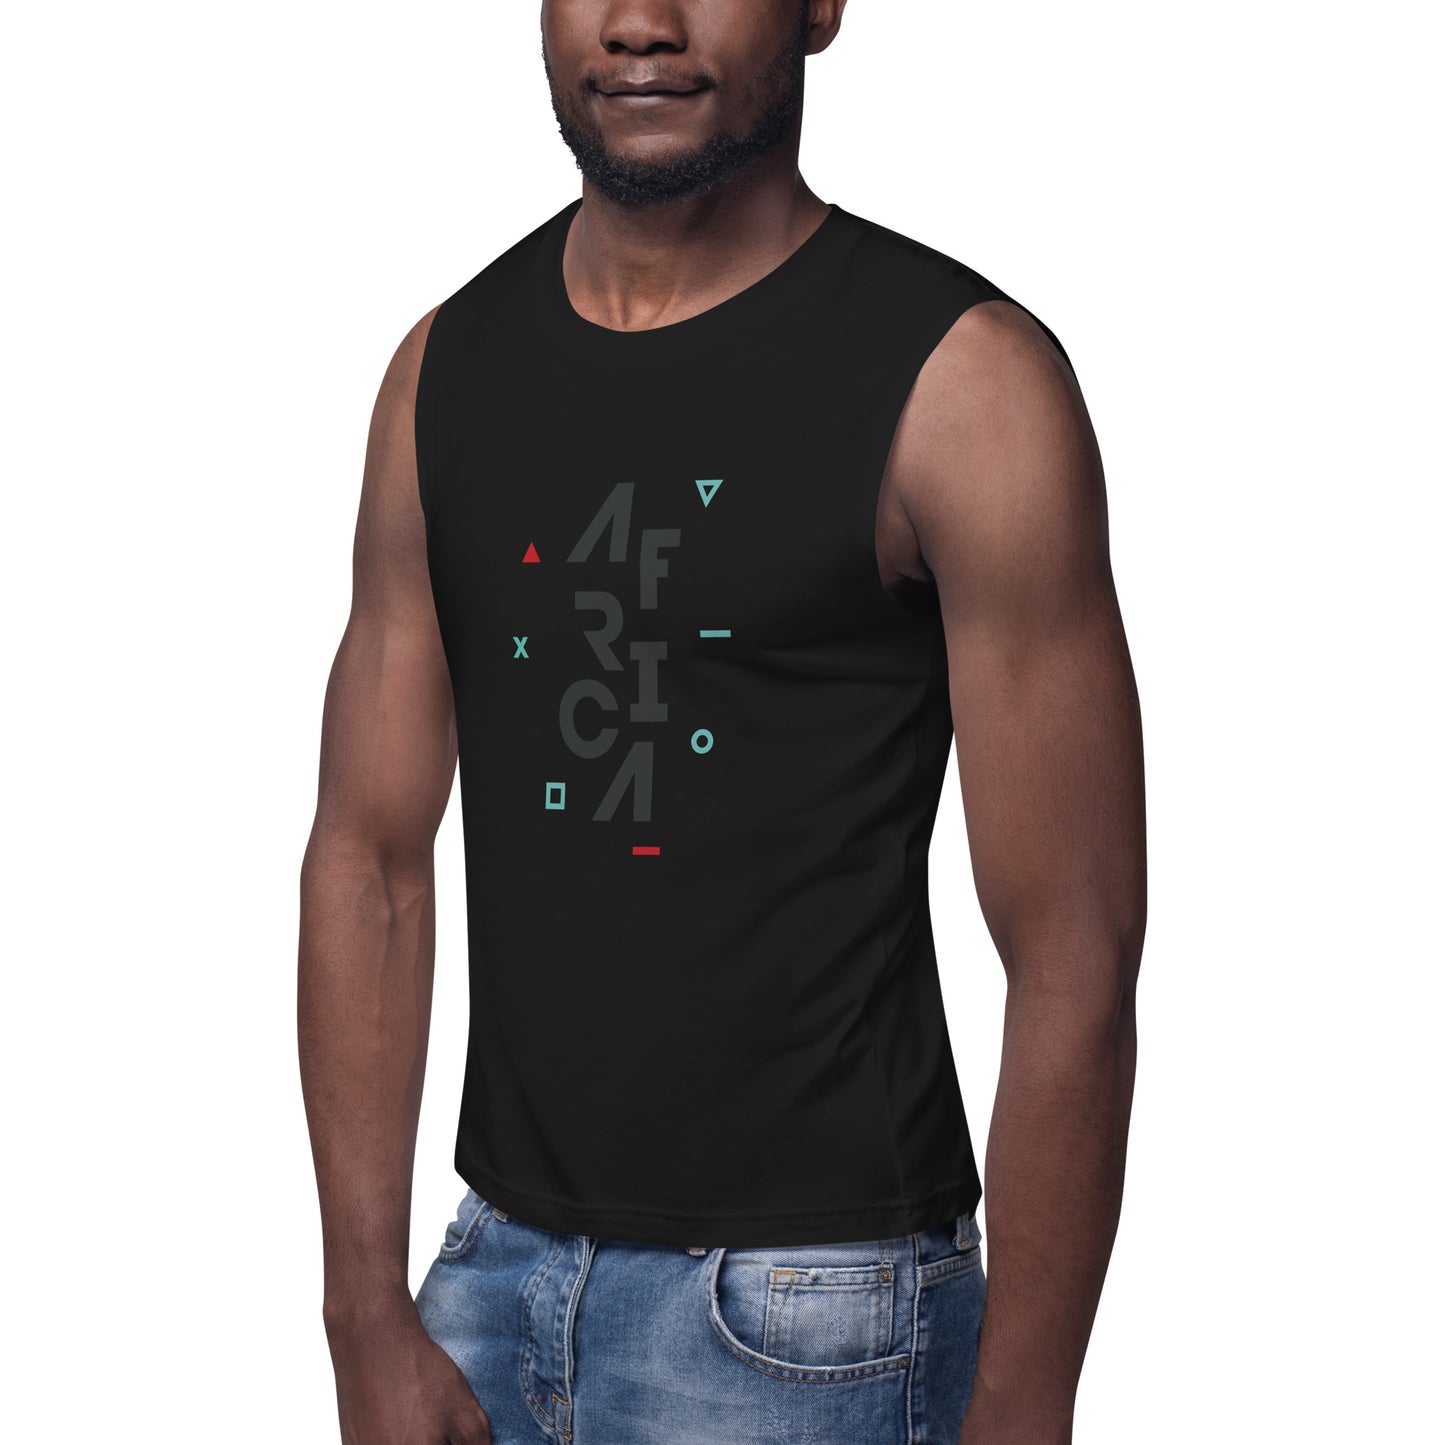 AFRICA IS THE FUTURE Muscle Shirt